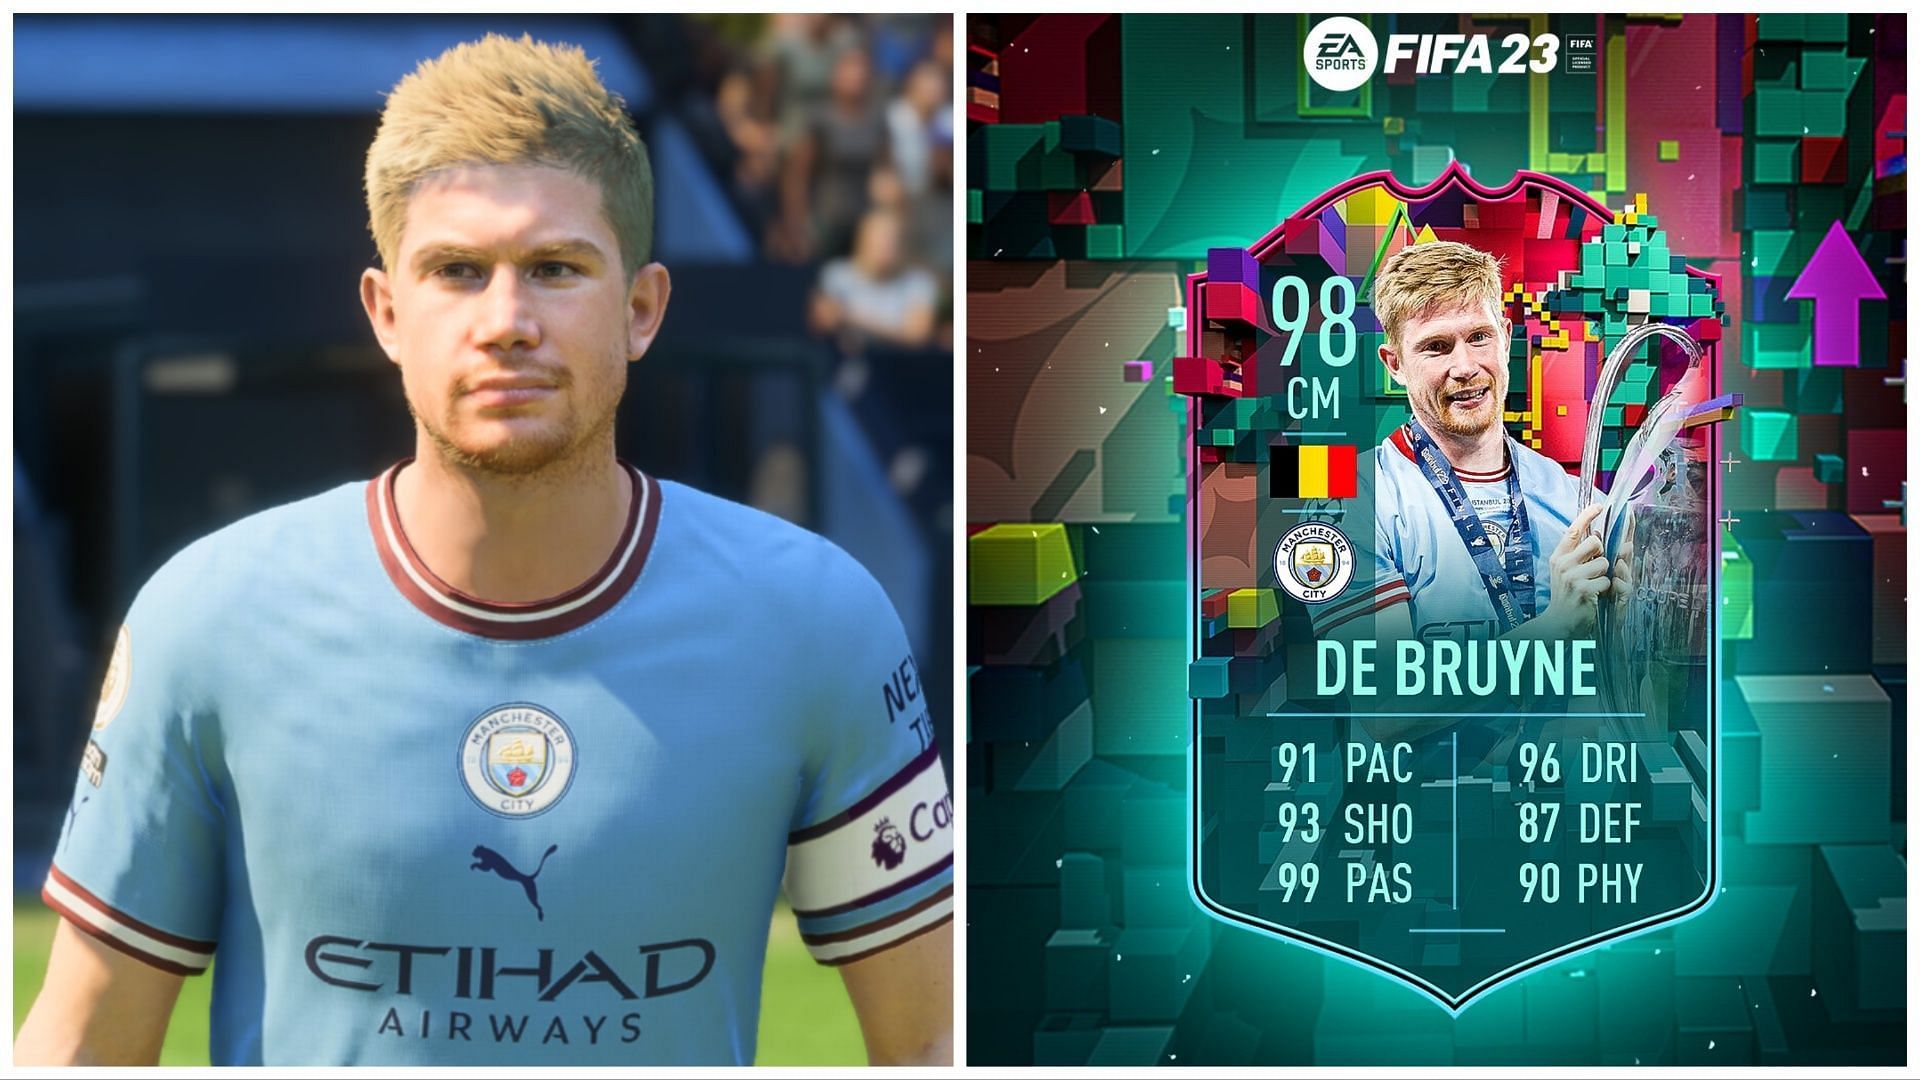 Level Up De Bruyne has been leaked (Image via EA Sports and Twitter/FUT Sheriff)